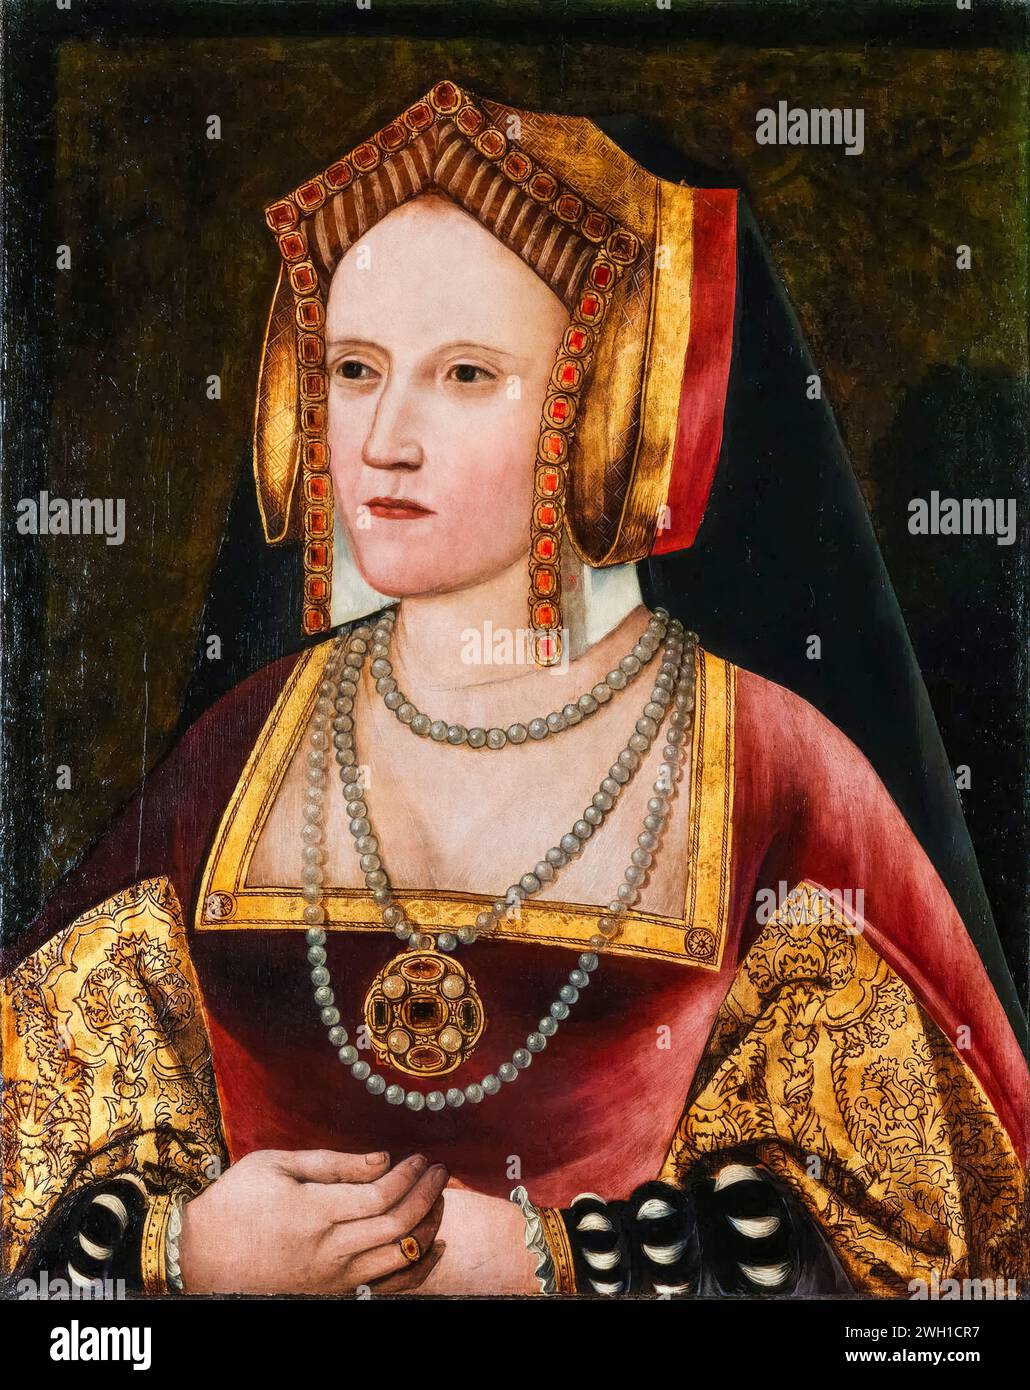 Catherine of Aragon or Katherine of Aragon (1485-1536), Queen of England (1509-1533), portrait painting in oil on panel, circa 1520 Stock Photo